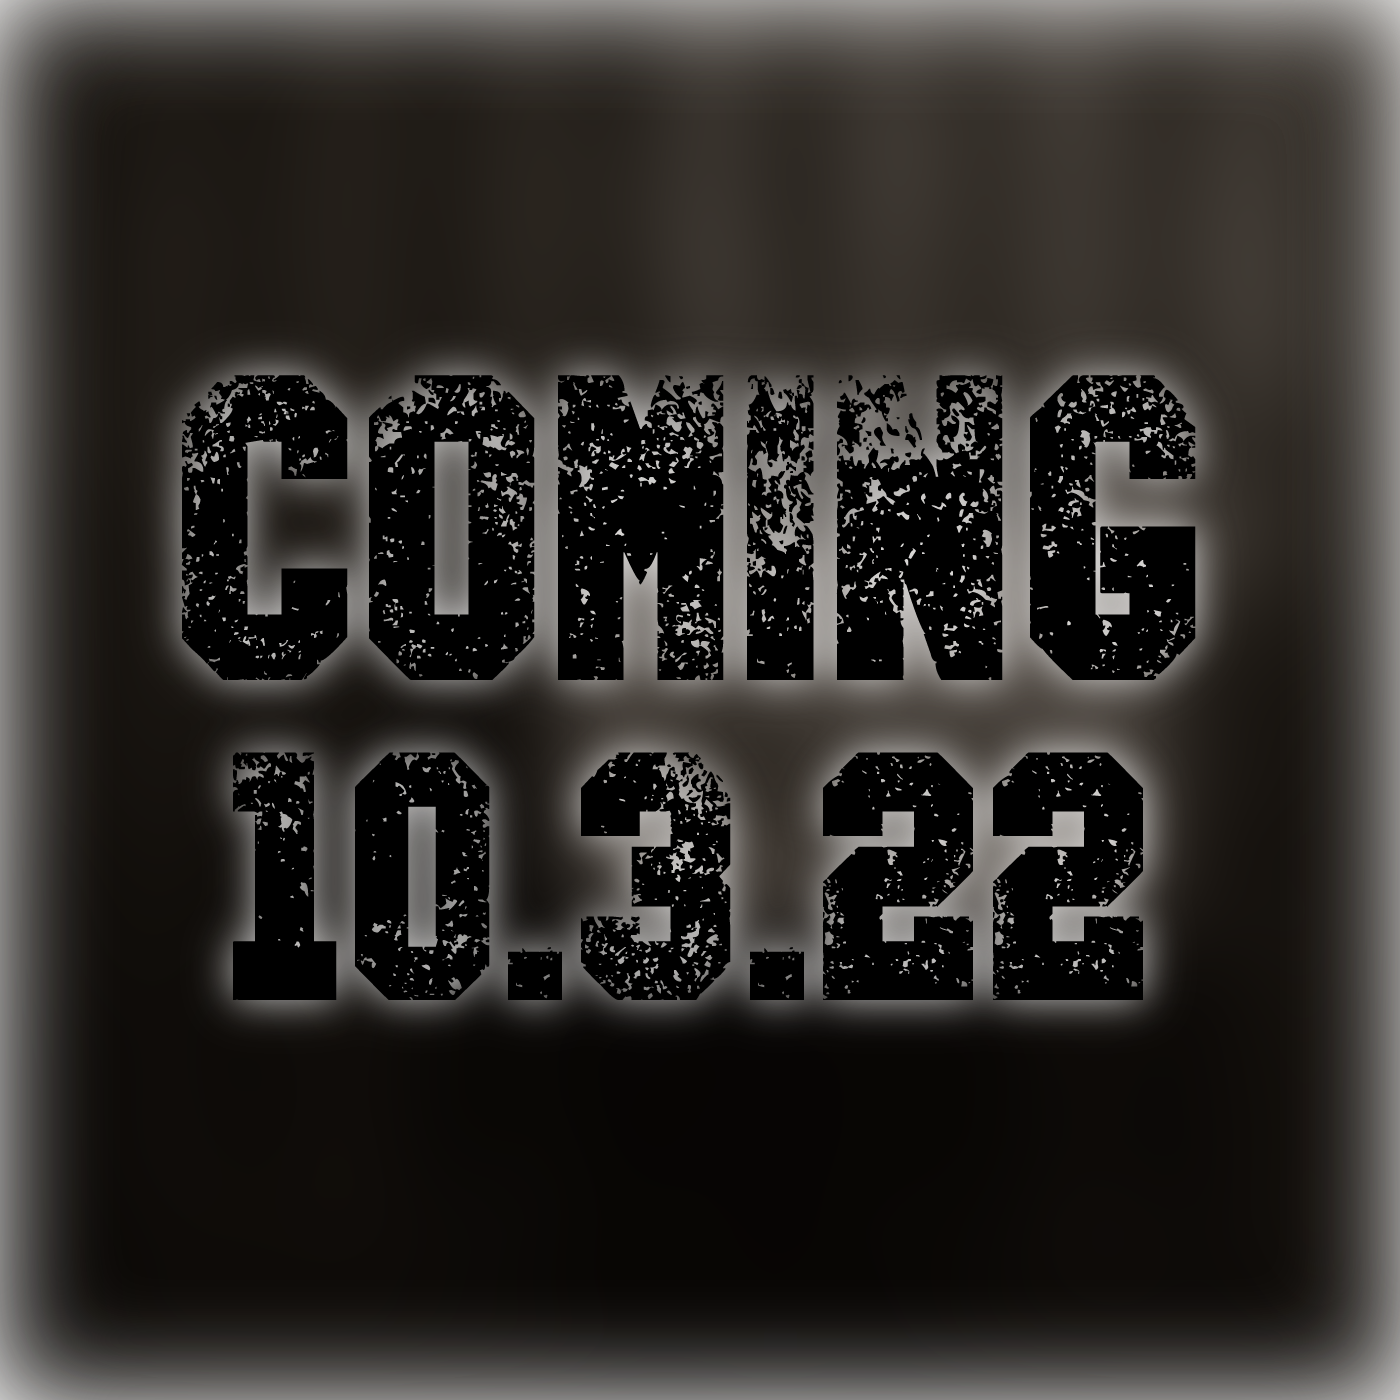 Coming 10.3.22